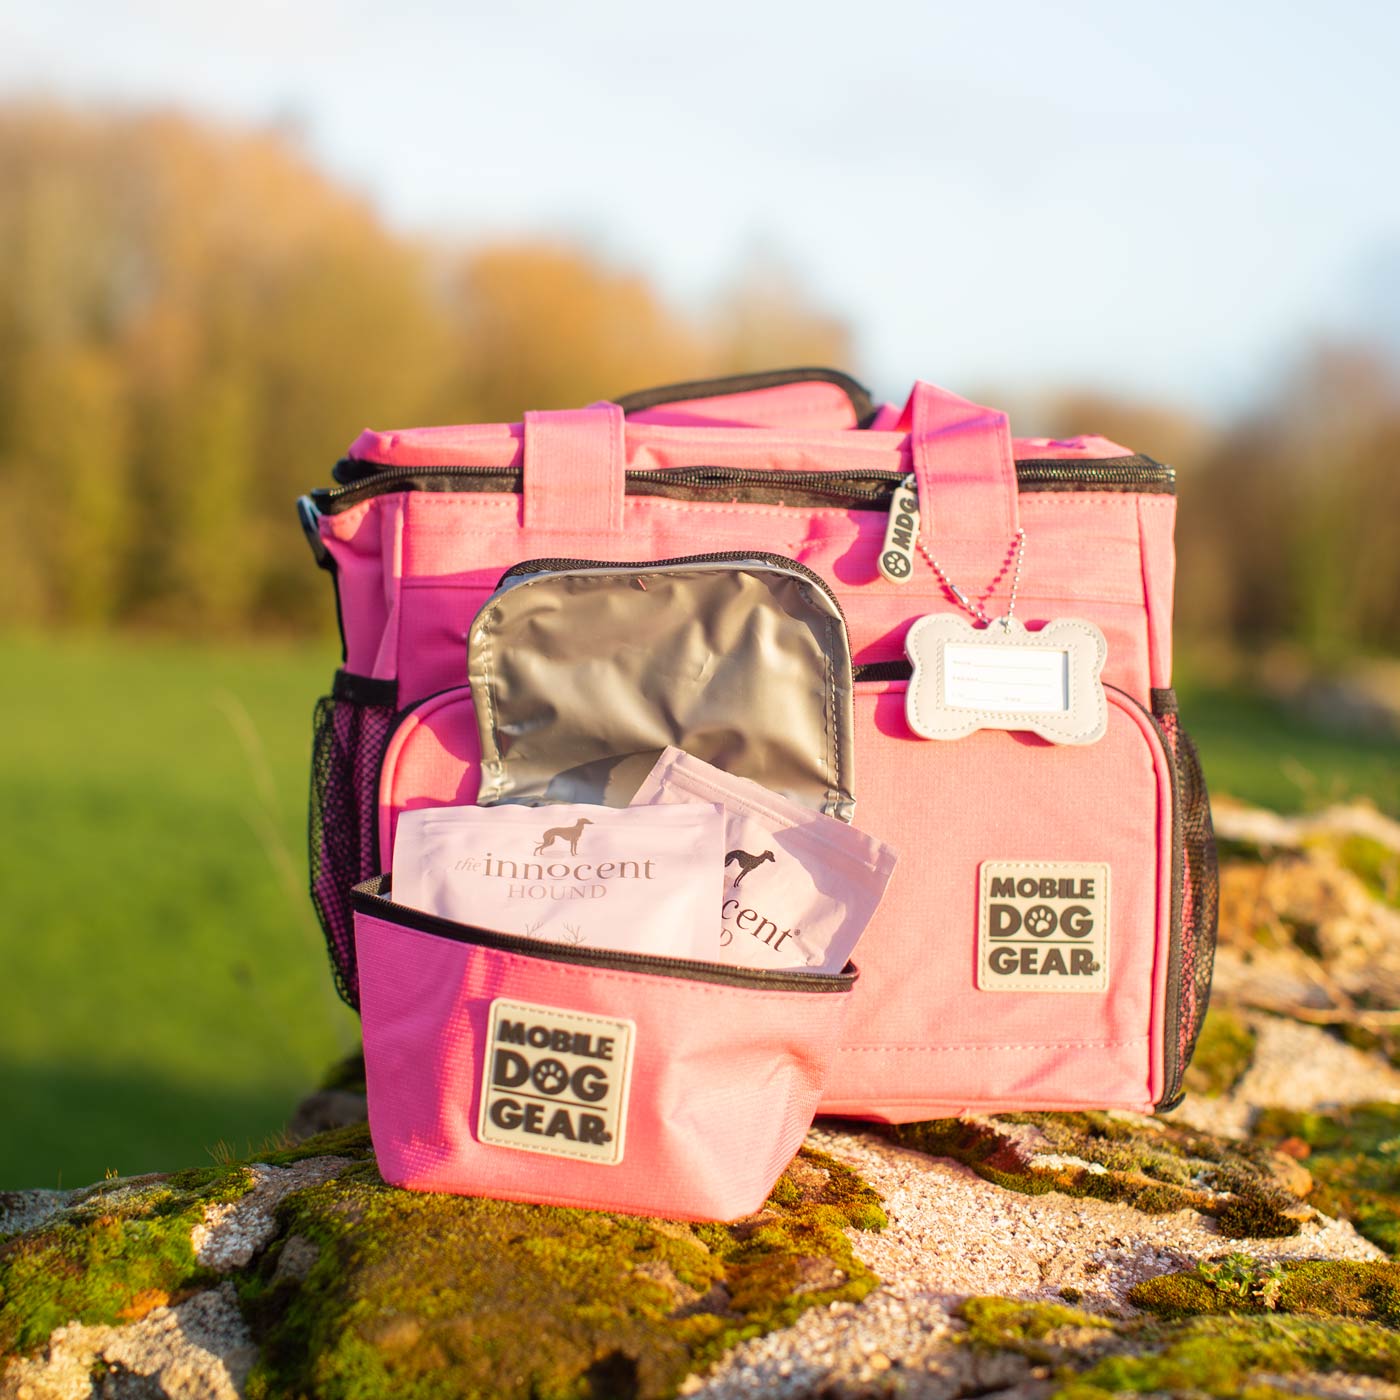 Discover, Mobile Dog Gear Week Away Bag, in Pink. The Perfect Away Bag for any Pet Parent, Featuring dividers to stack food and built in waste bag dispenser. Also Included feeding set, collapsible silicone bowls and placemat! The Perfect Gift For travel, meets airline requirements. Available Now at Lords & Labradors